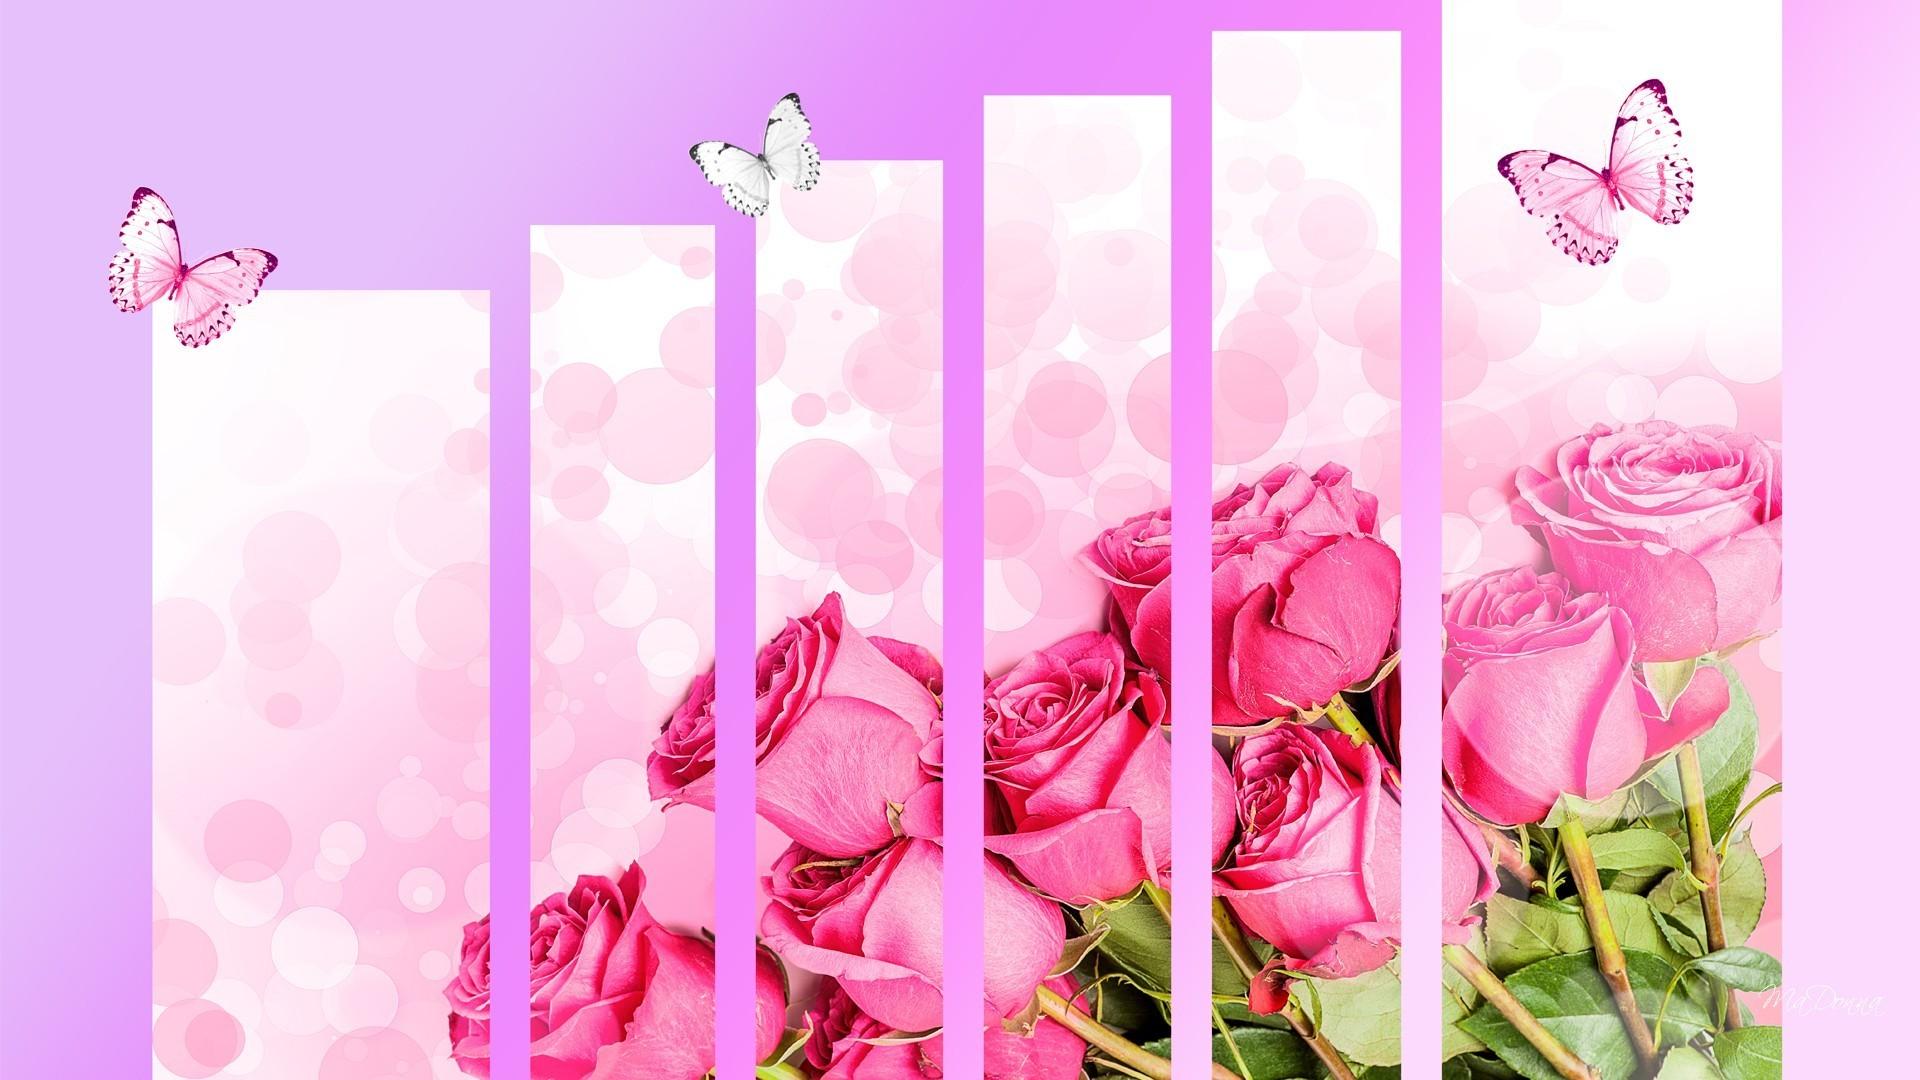 Roses so special wallpaper. PC